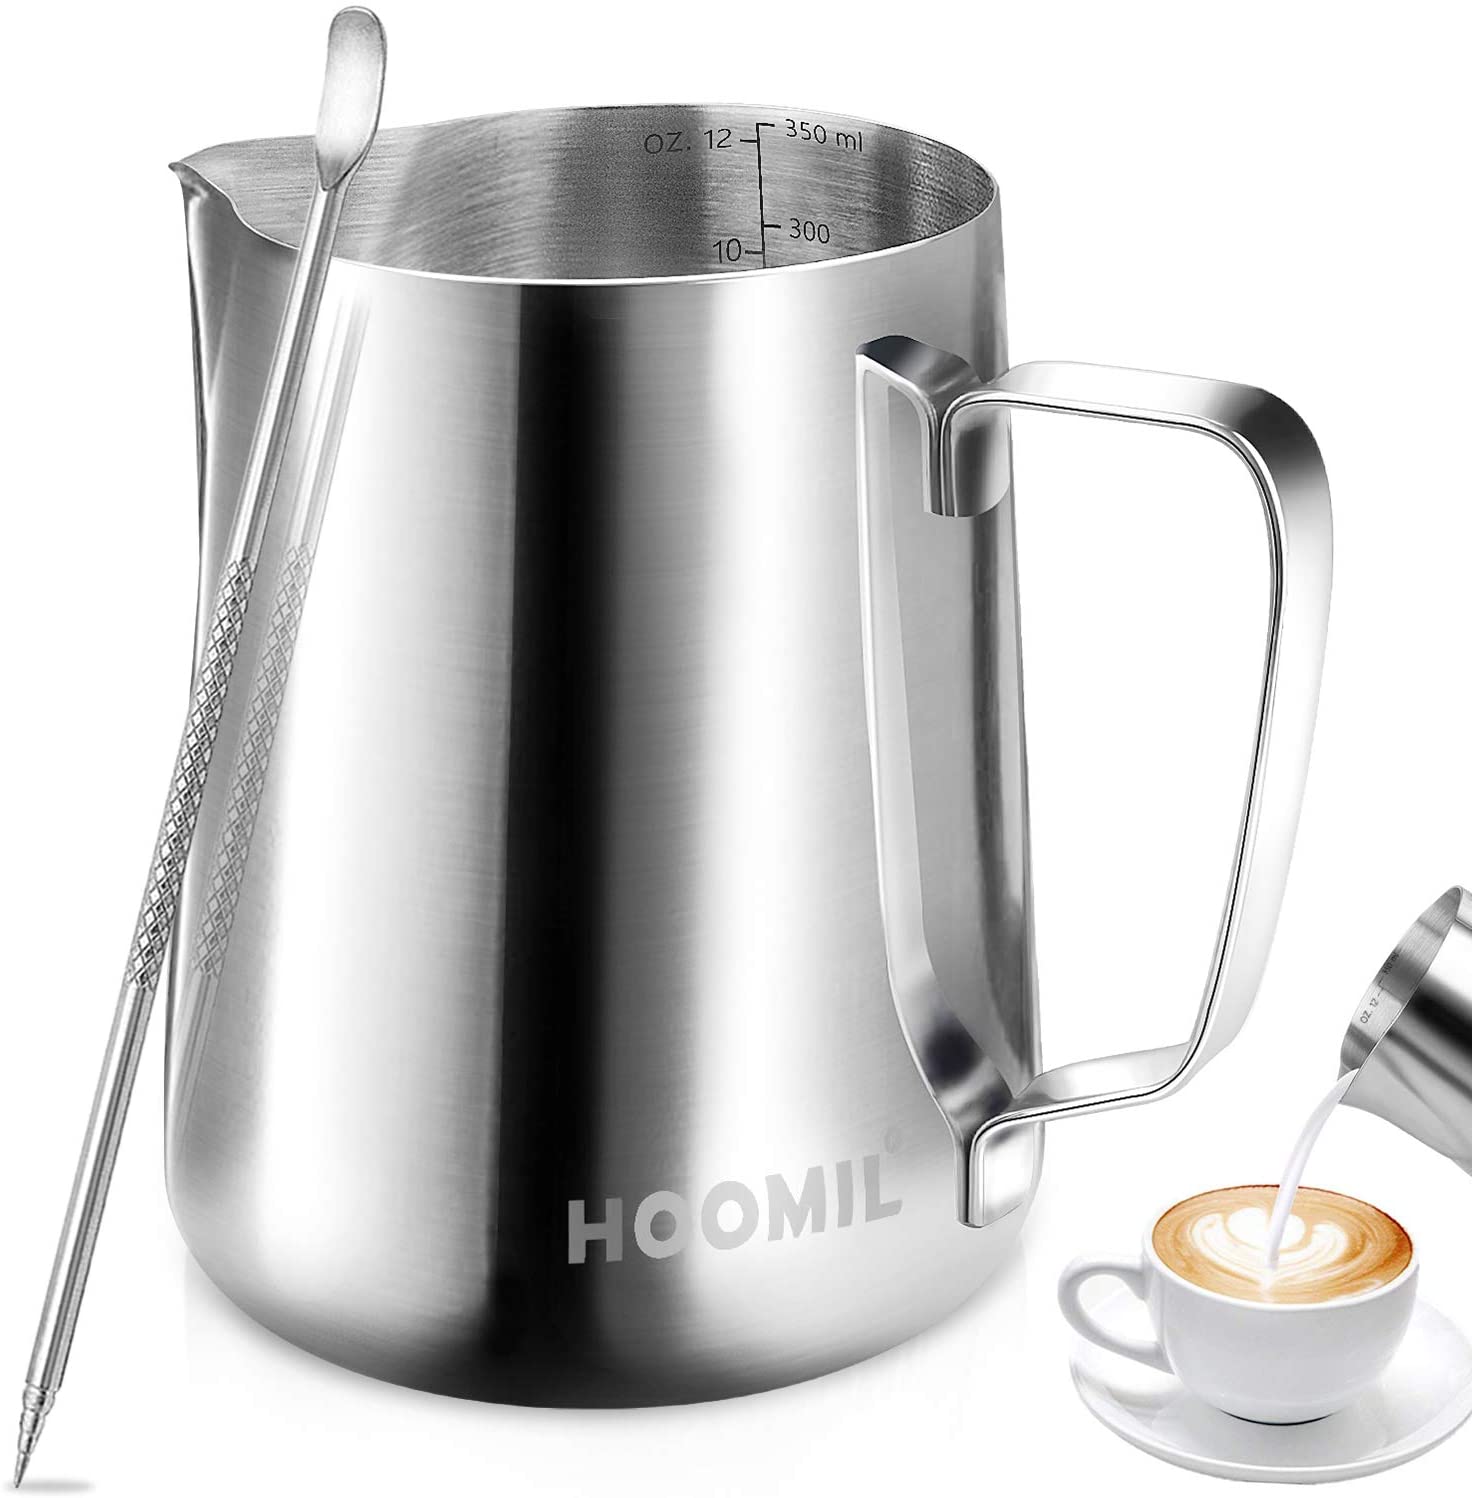 20 OZ. Steaming Pitcher,T-Buy Frothing Pitcher,Stainless Steel Milk Frothing Pitcher,Coffee Maker Accessories with Lid for Making Latte Coffee Art,Cappuccino